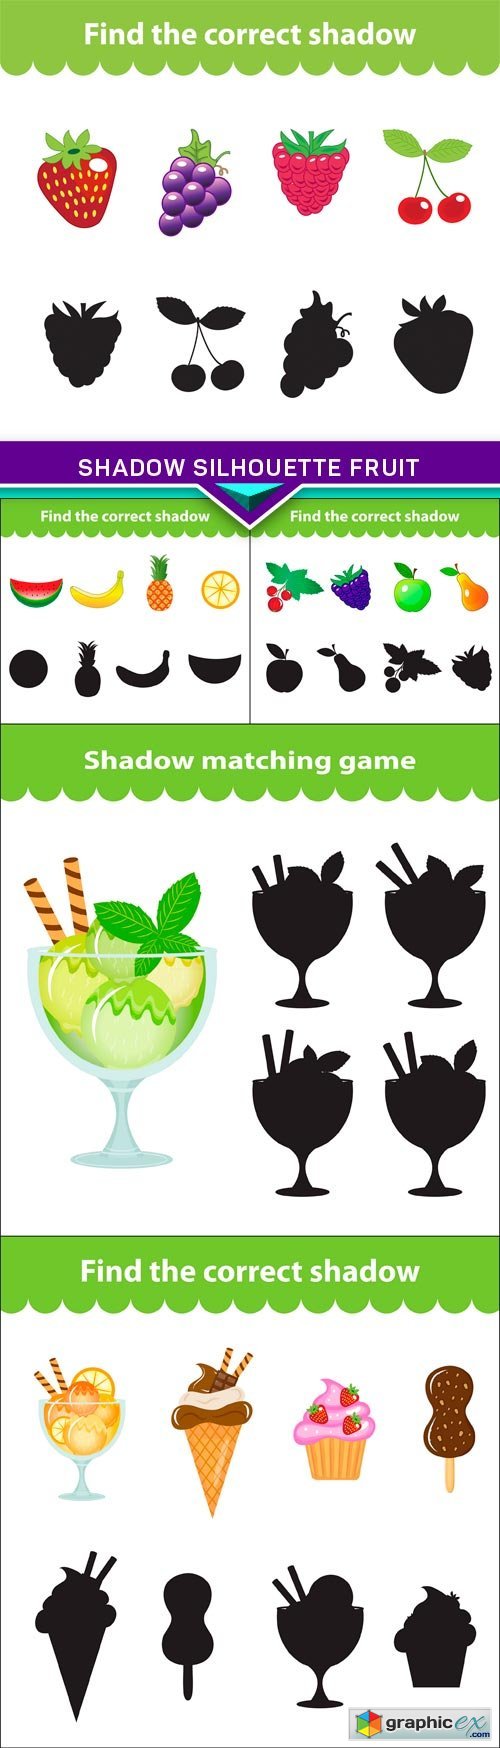 Children's educational game, shadow silhouette fruit 5X EPS